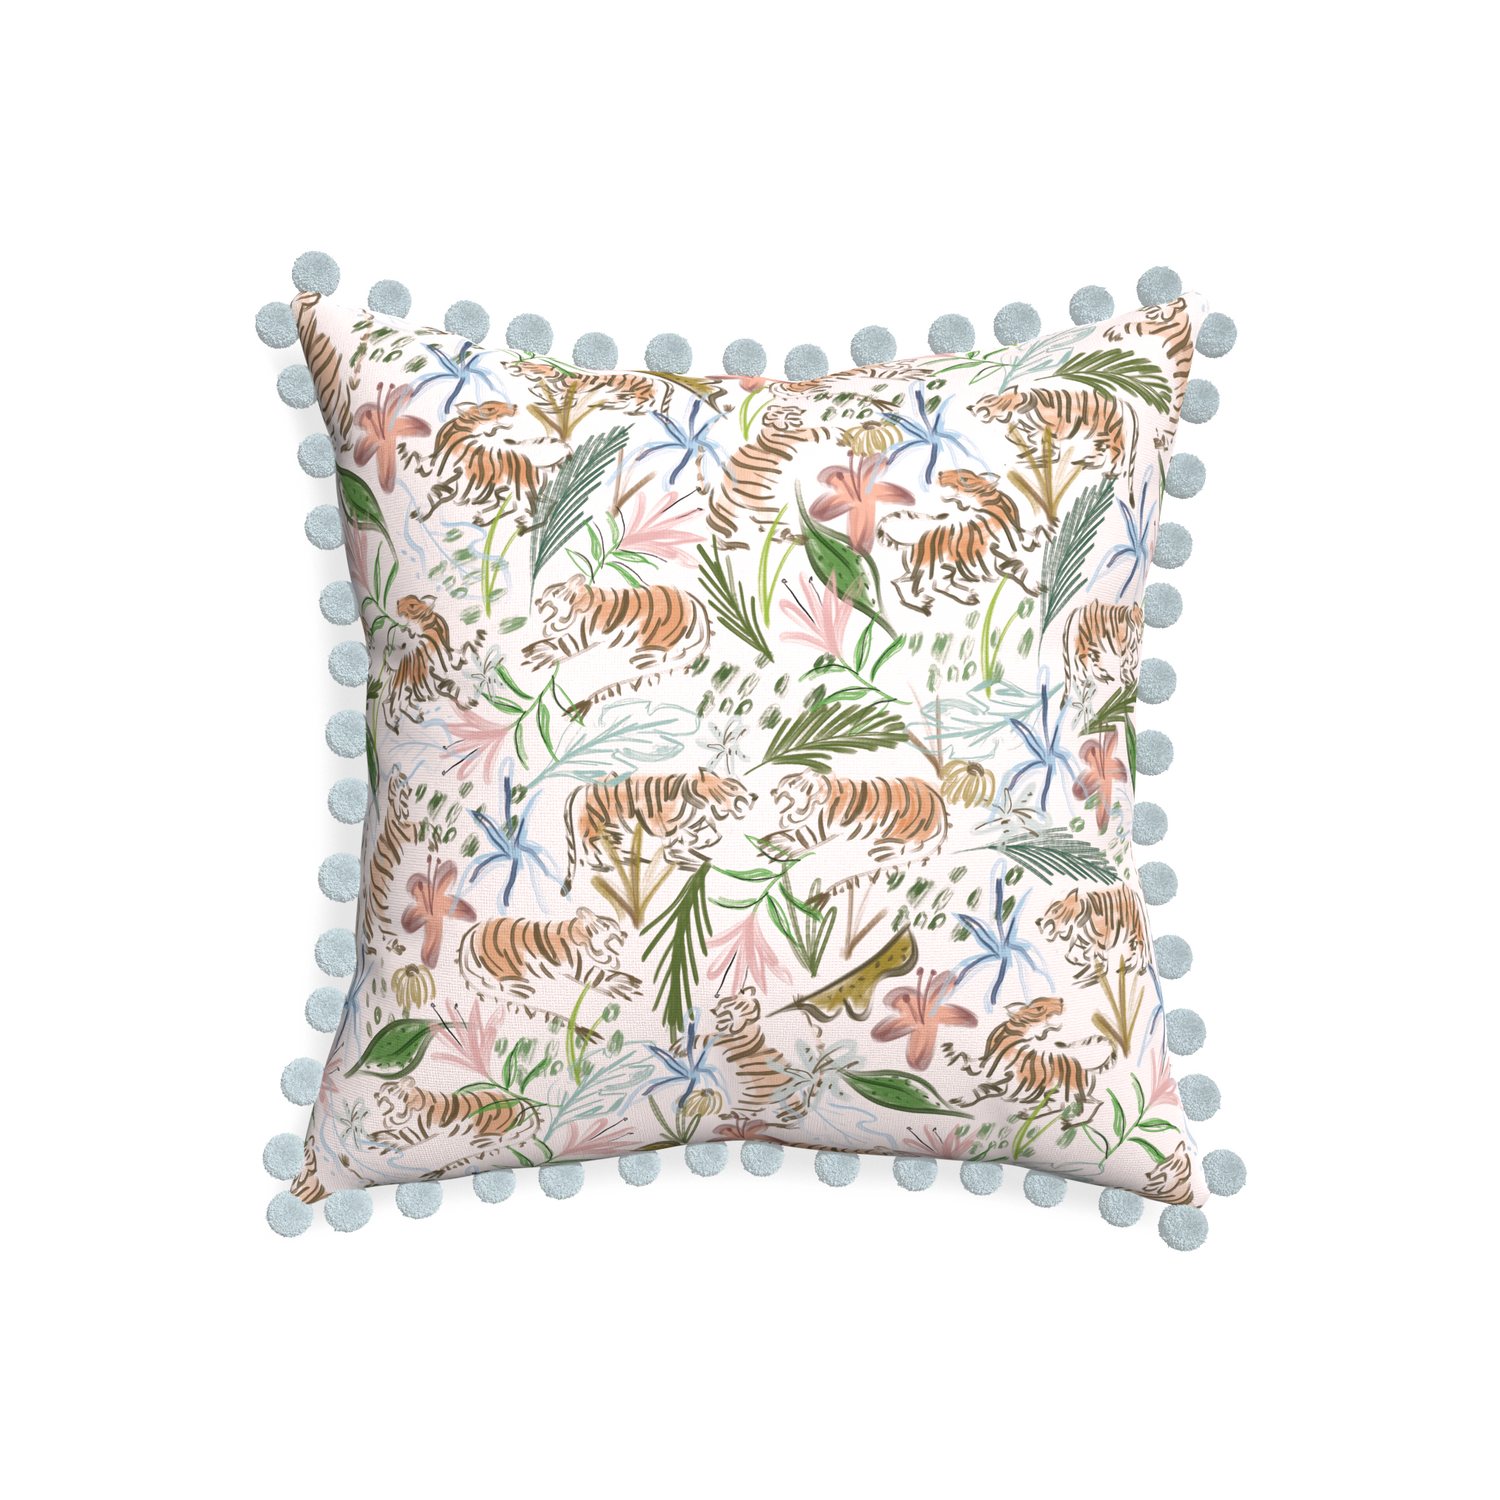 20-square frida pink custom pink chinoiserie tigerpillow with powder pom pom on white background